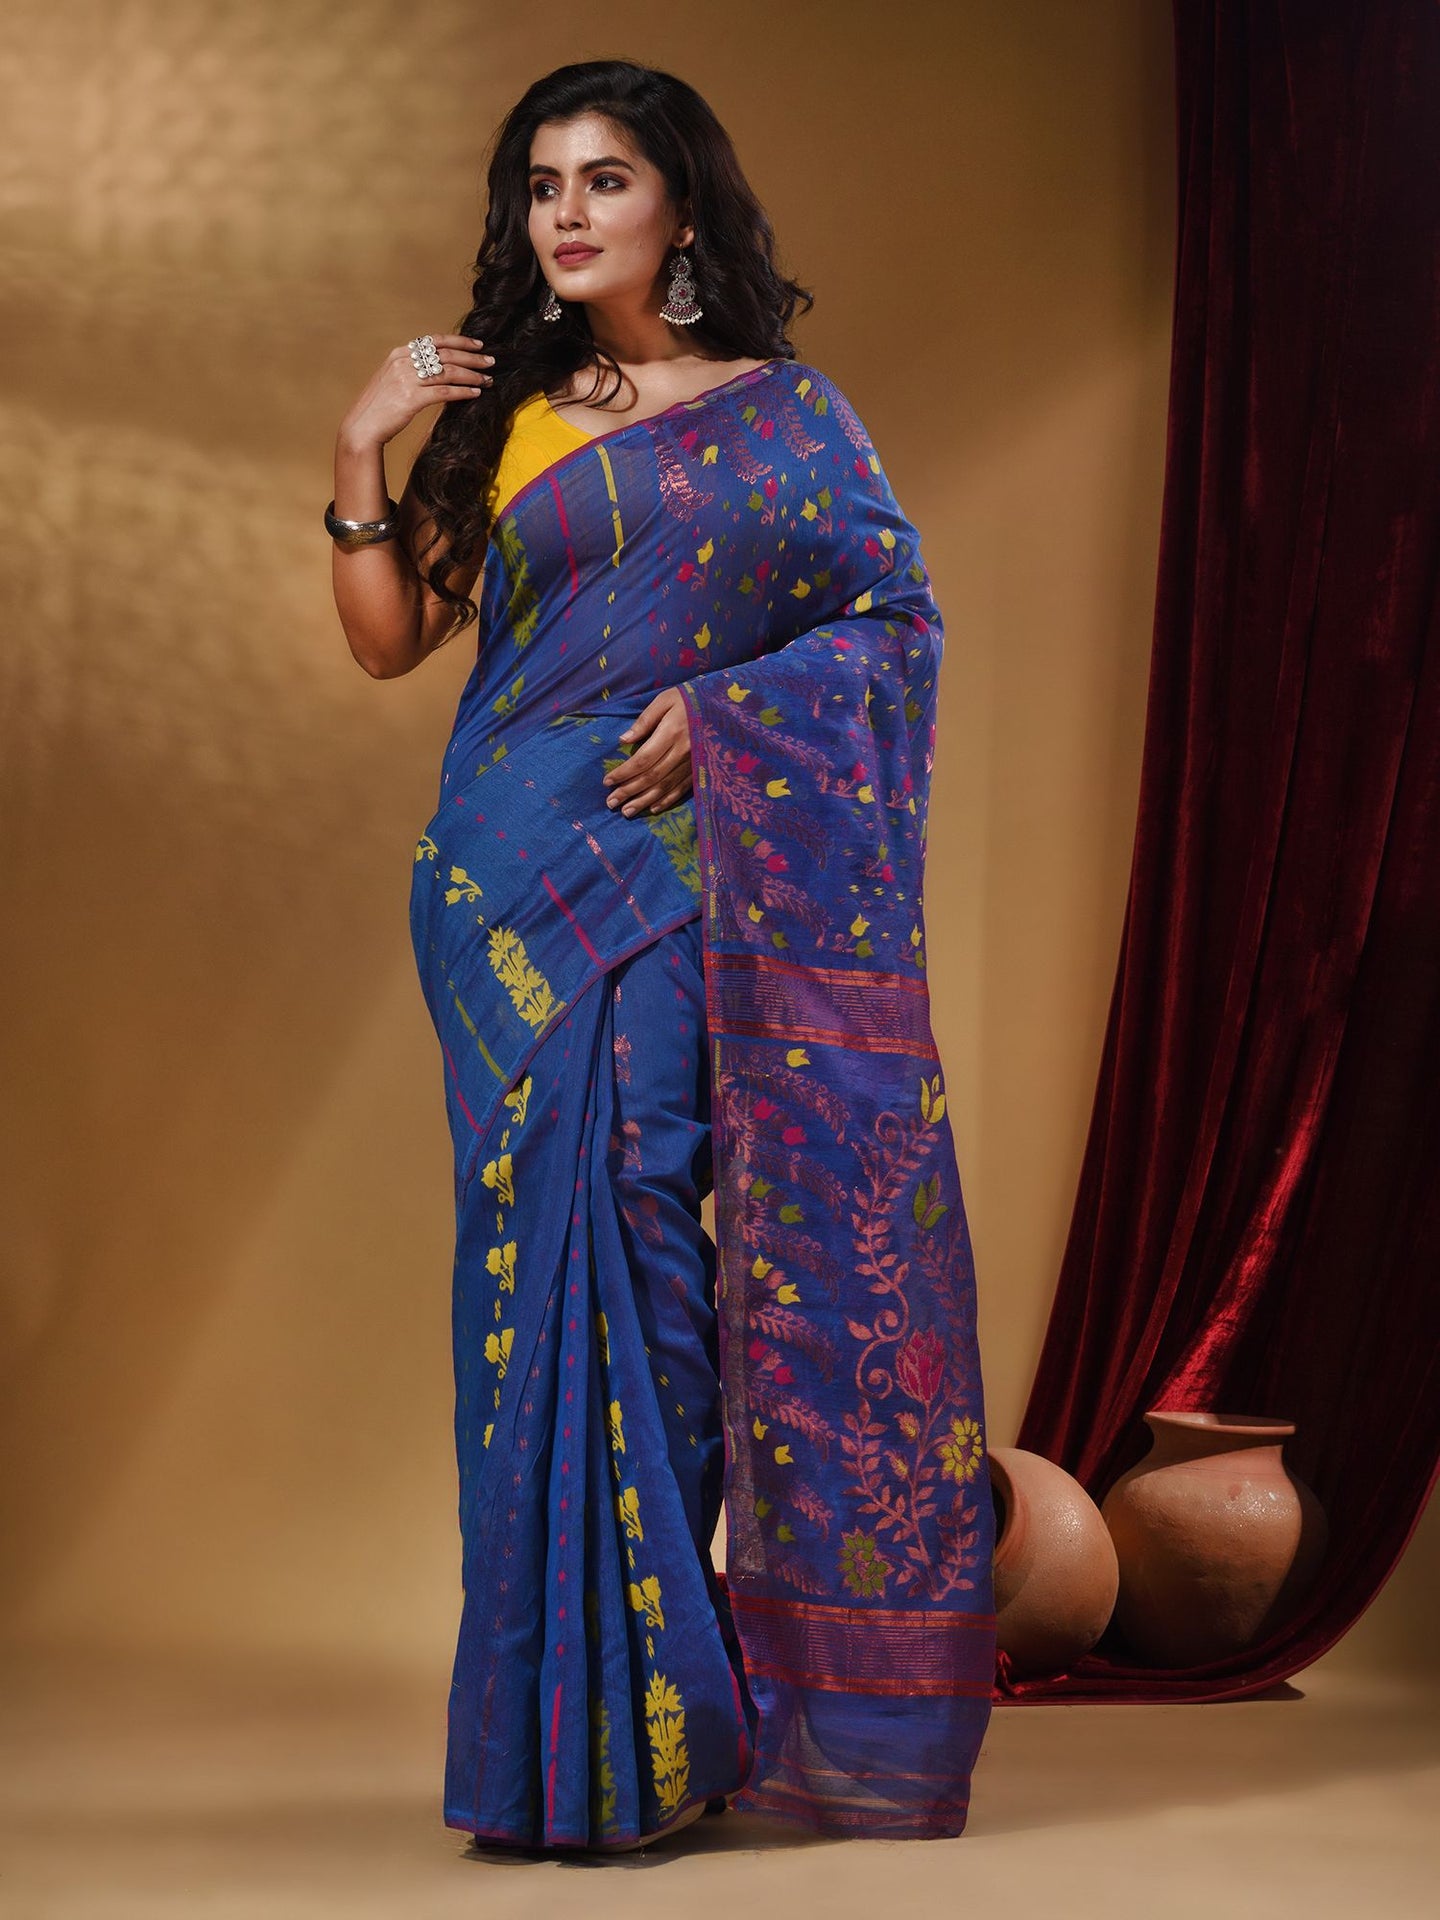 Sapphire Blue Cotton Handwoven Jamdani Saree With Multicolor Floral Designs And Motifs